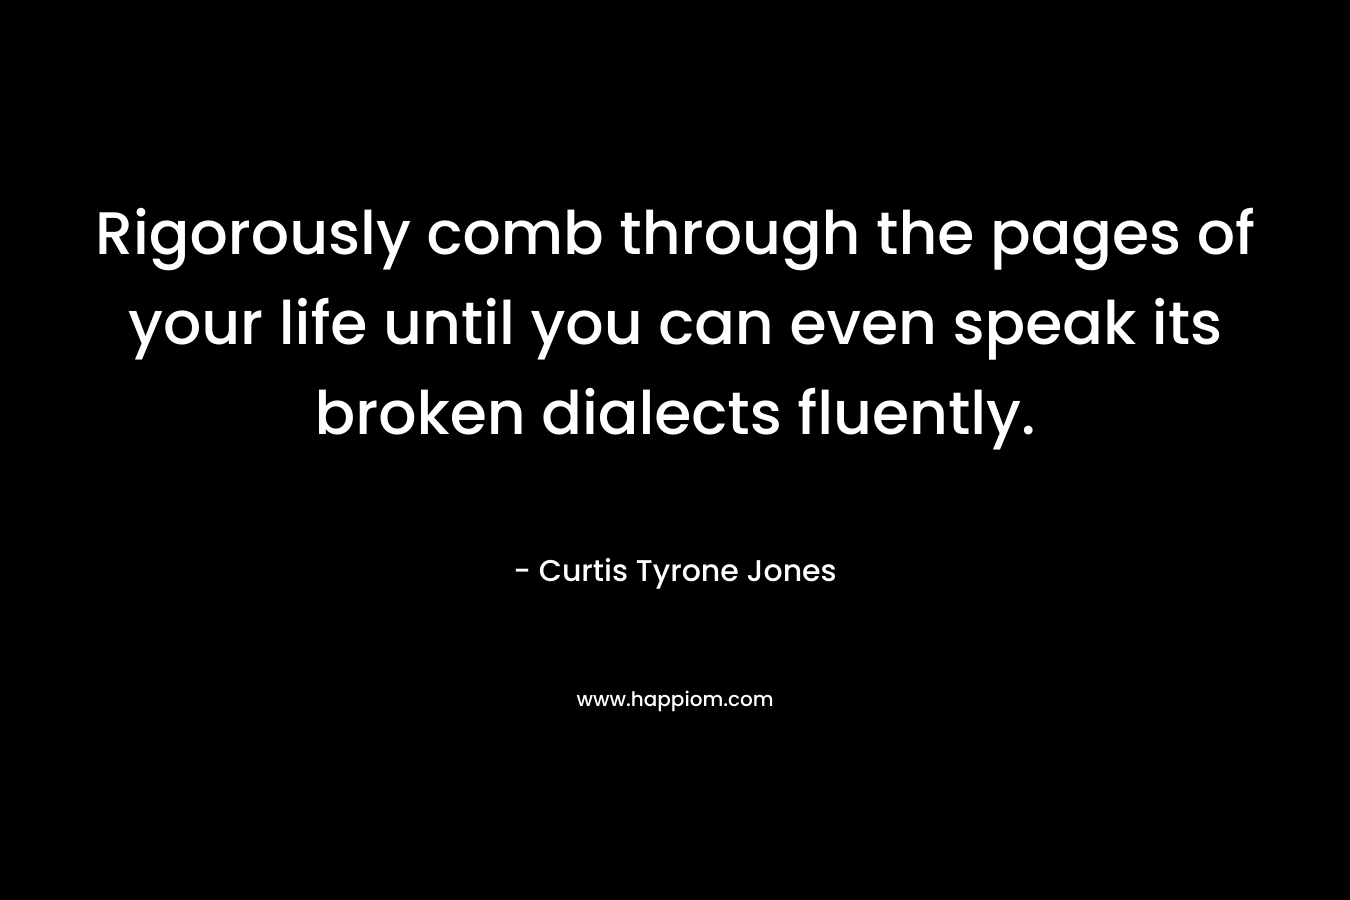 Rigorously comb through the pages of your life until you can even speak its broken dialects fluently.